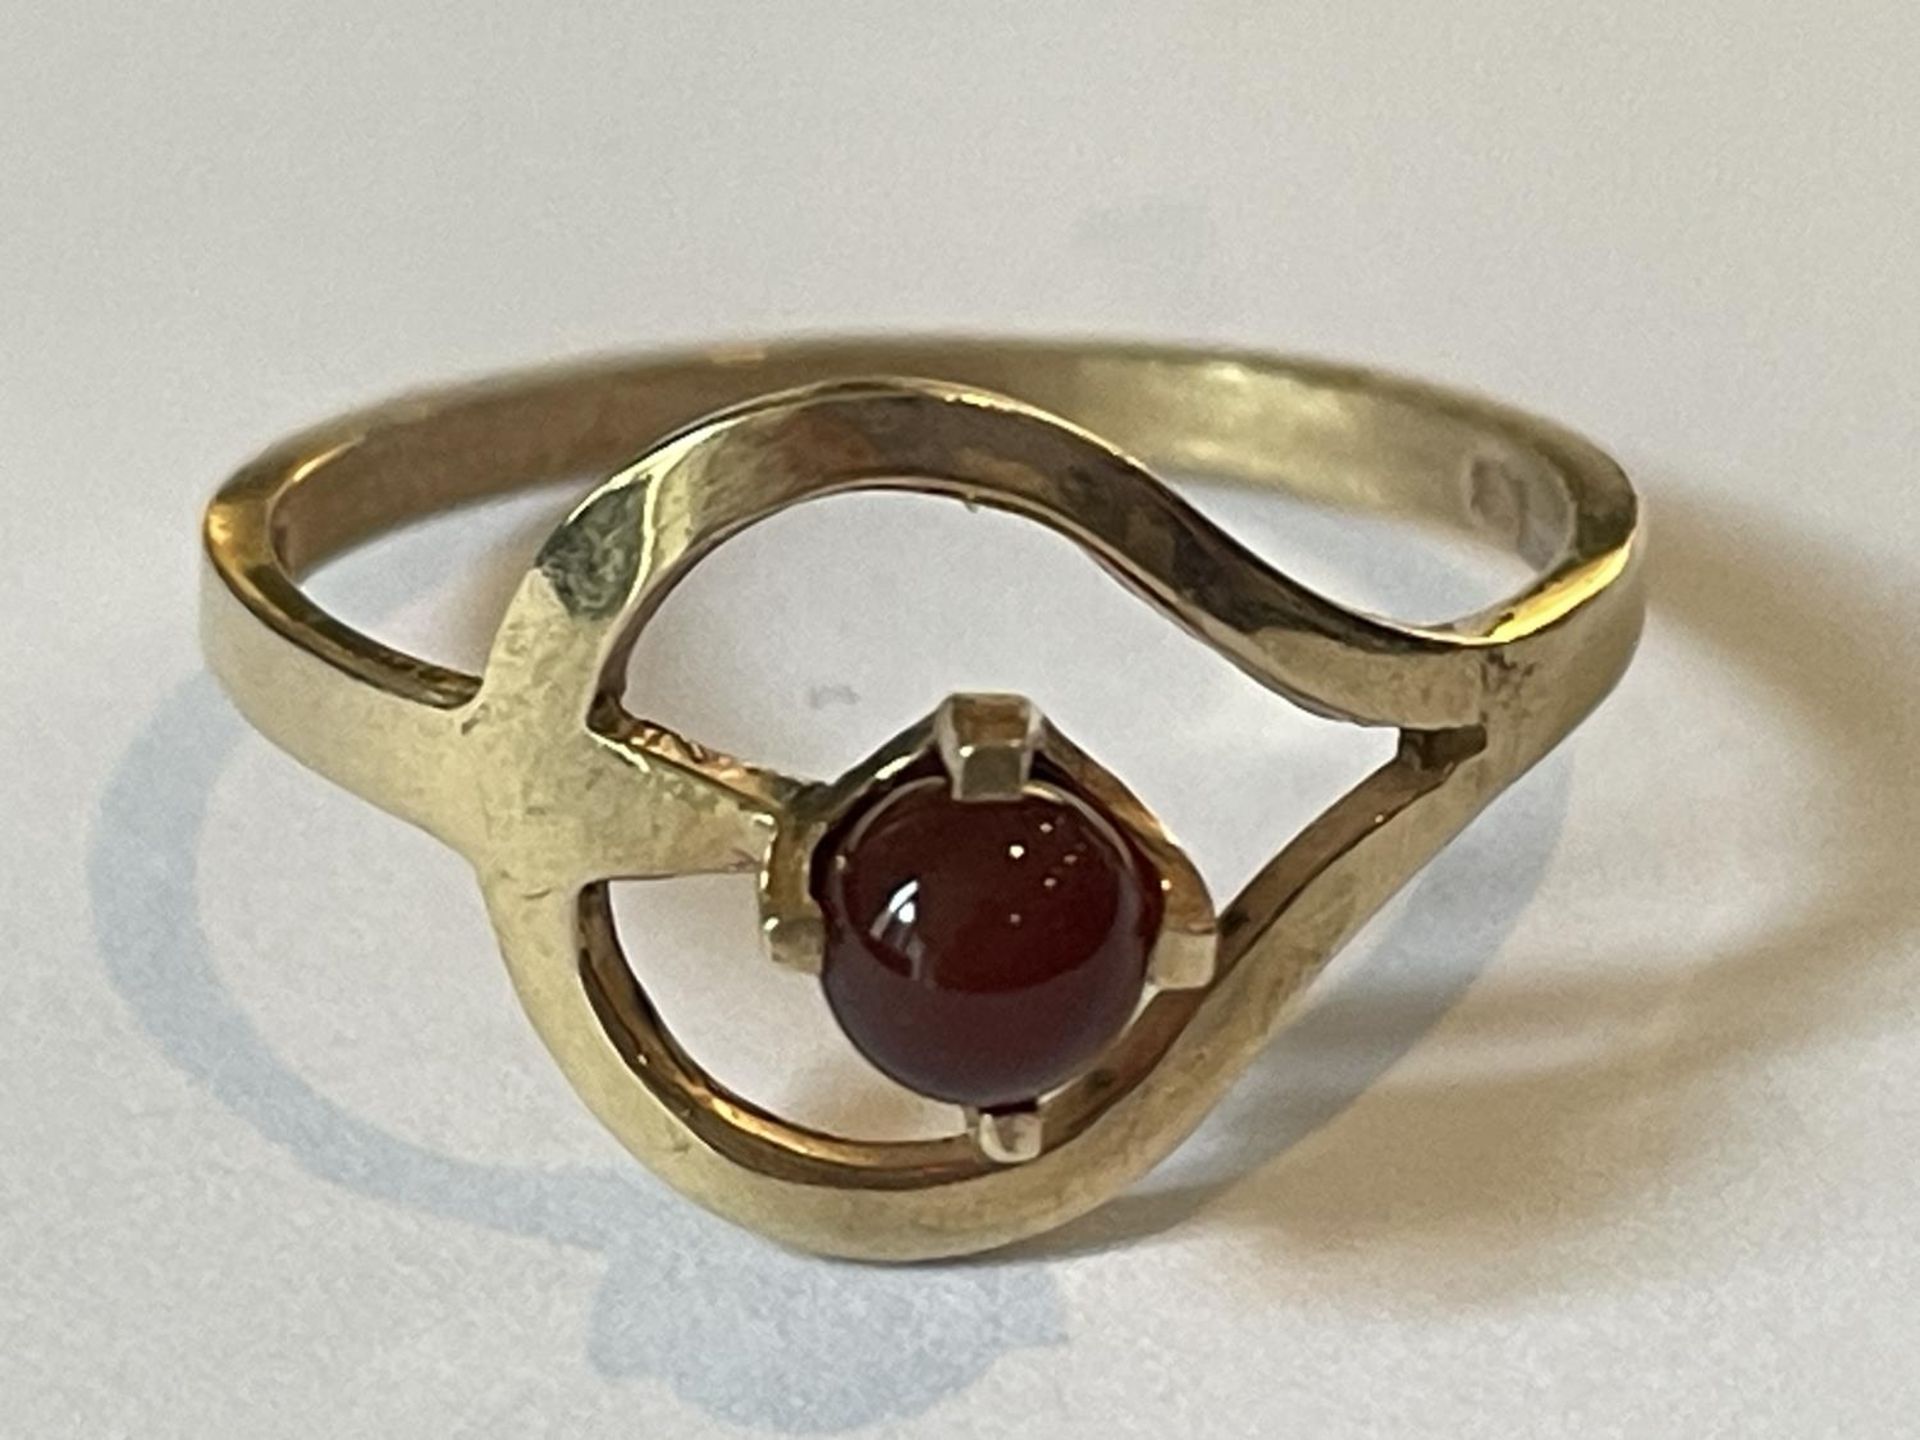 A 9 CARAT GOLD RING WITH A SPHERICAL GARNET IN A HEART SETTING SIZE O